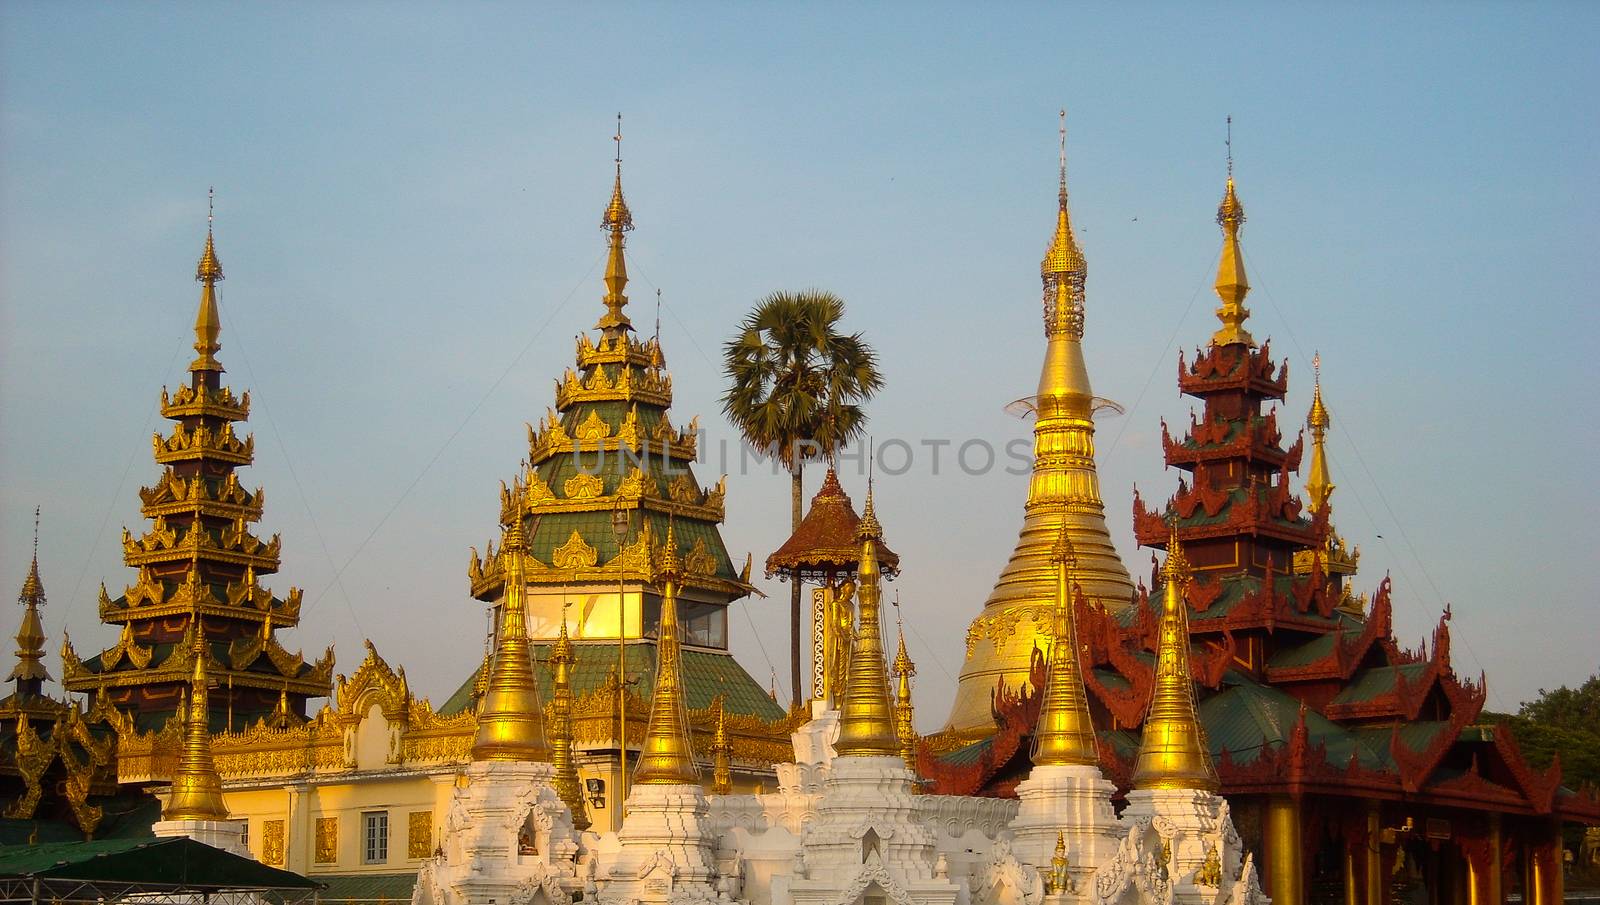 a temple in burma by Tevion25